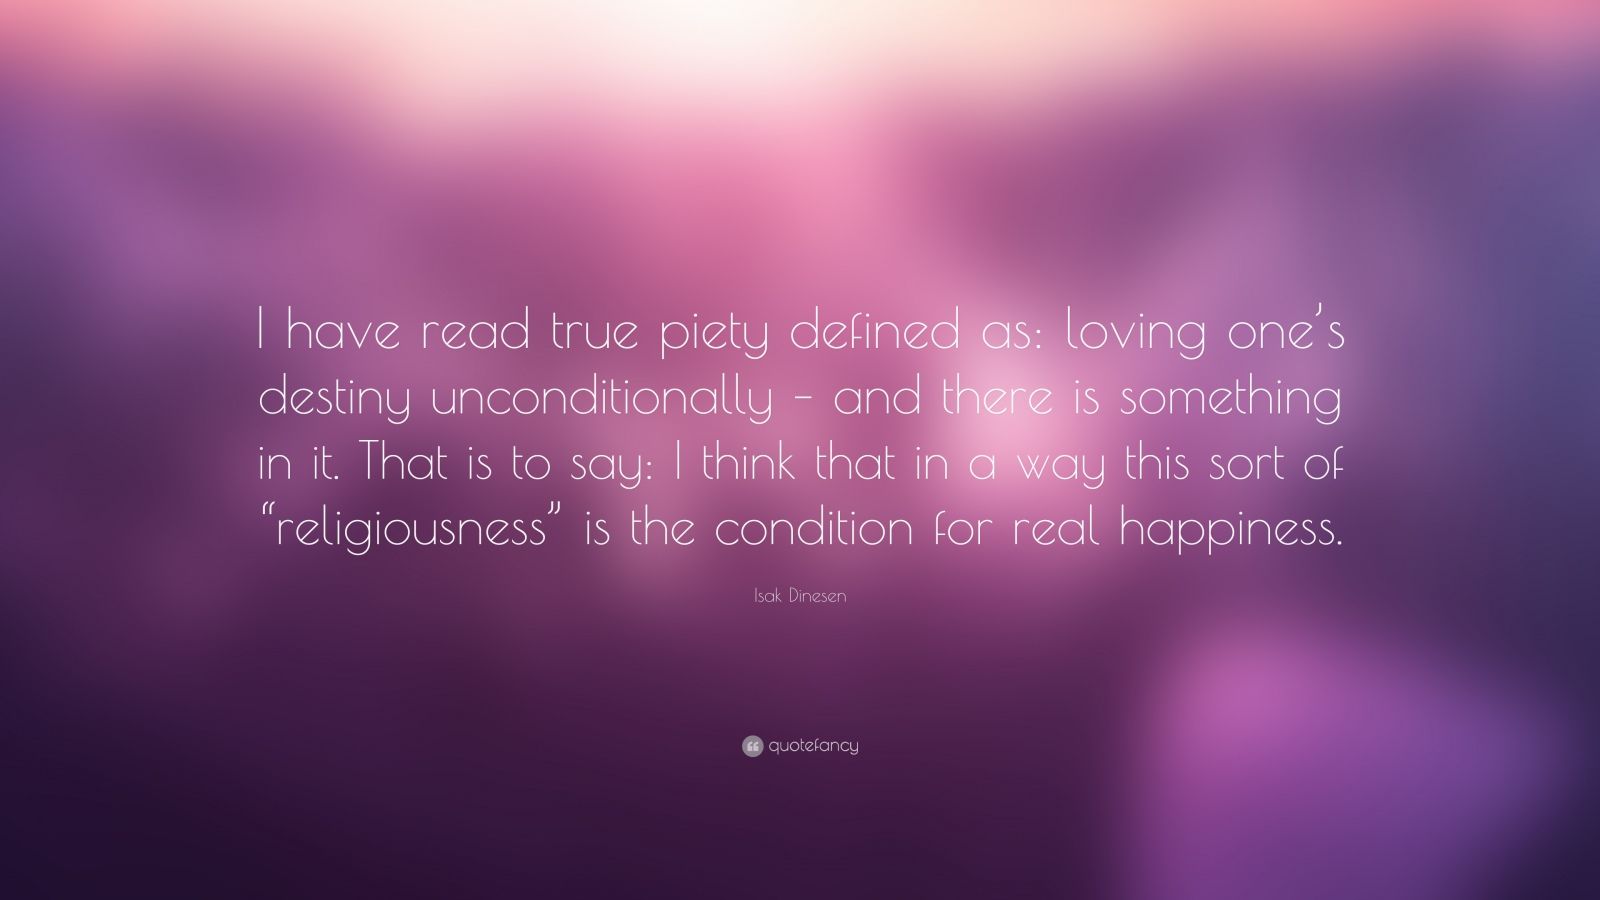 Isak Dinesen Quote “I have read true piety defined as loving one s destiny